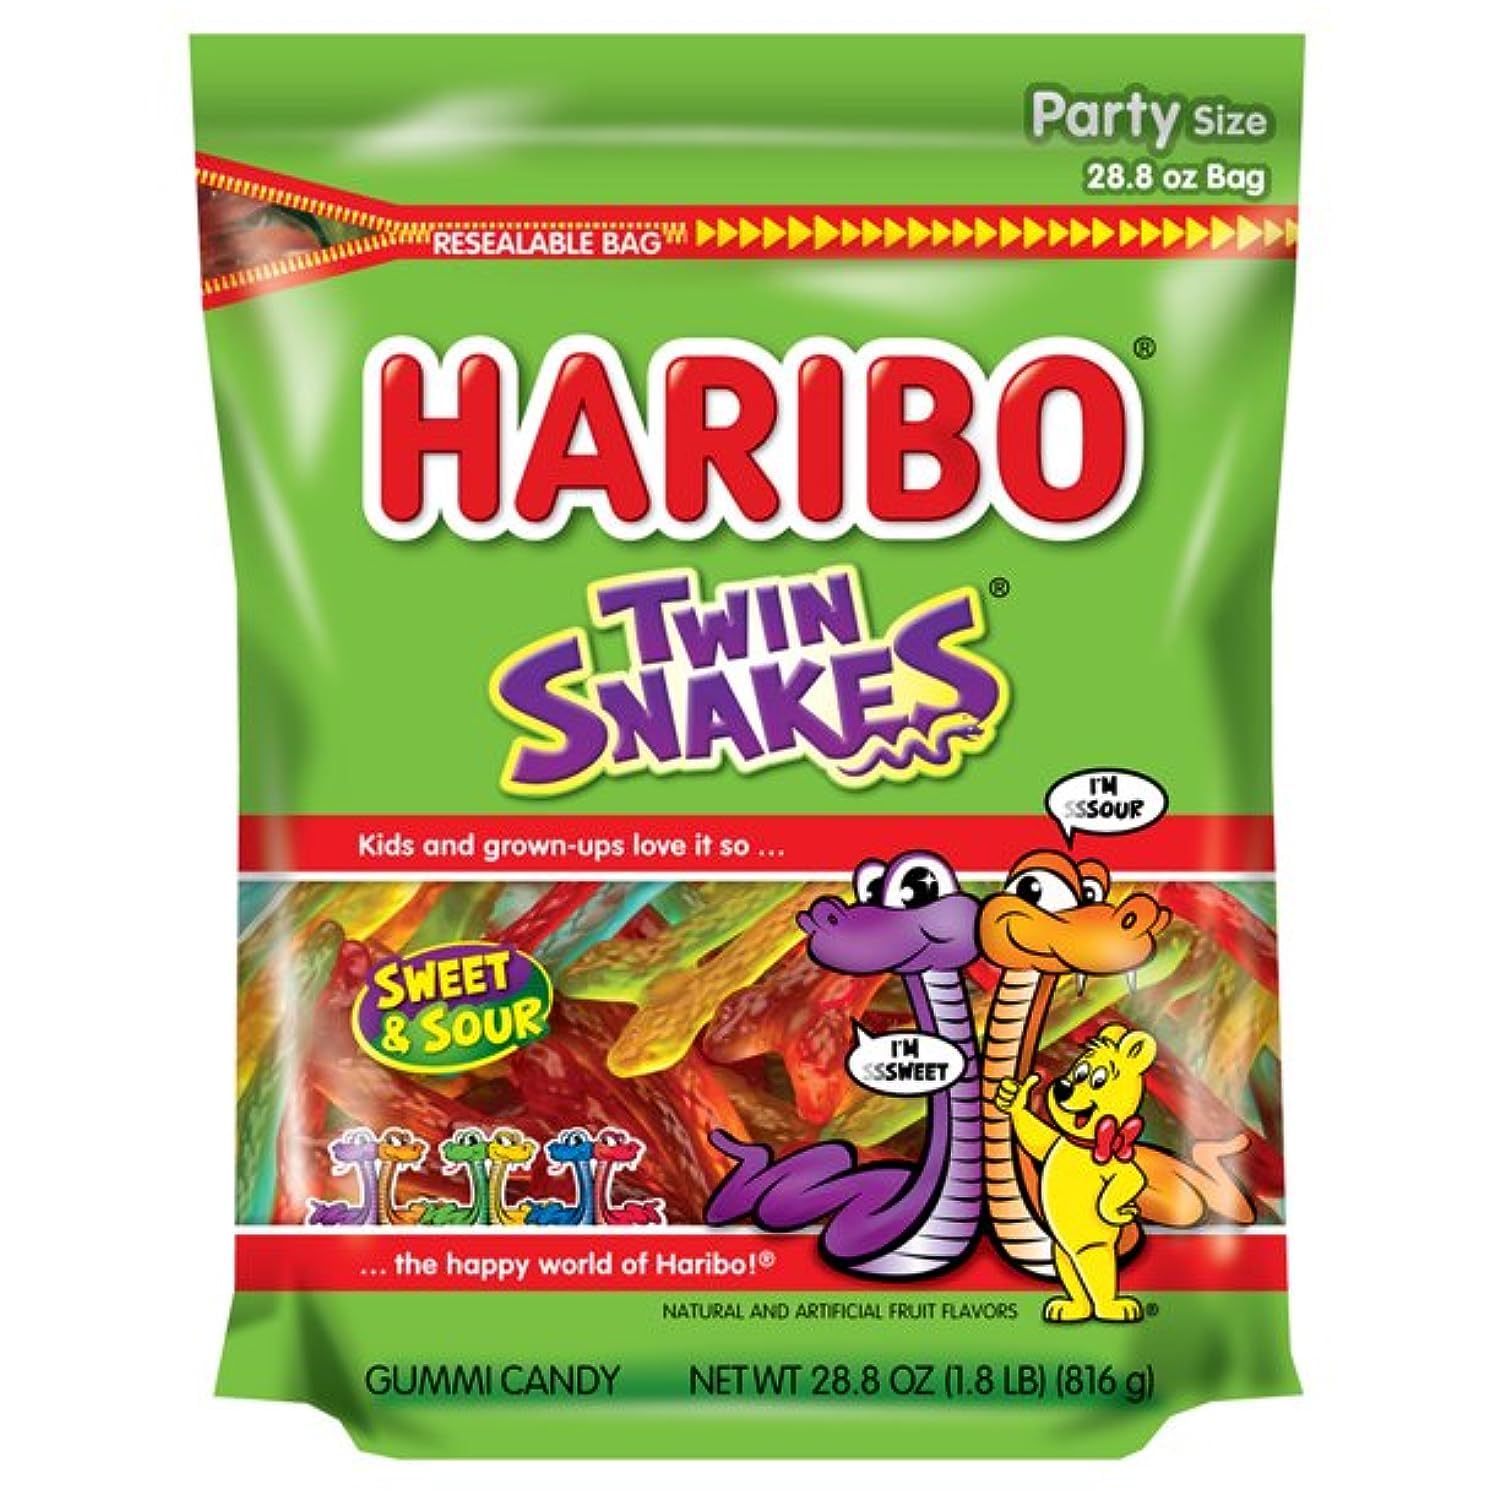 Haribo Twin Snakes Sweet & Sour Gummi Candy: 28.8-Oz. $4.62 w/ S&S, 8.3-Oz. $1.46 w/S&S + Free Shipping w/ Prime or on orders over $35